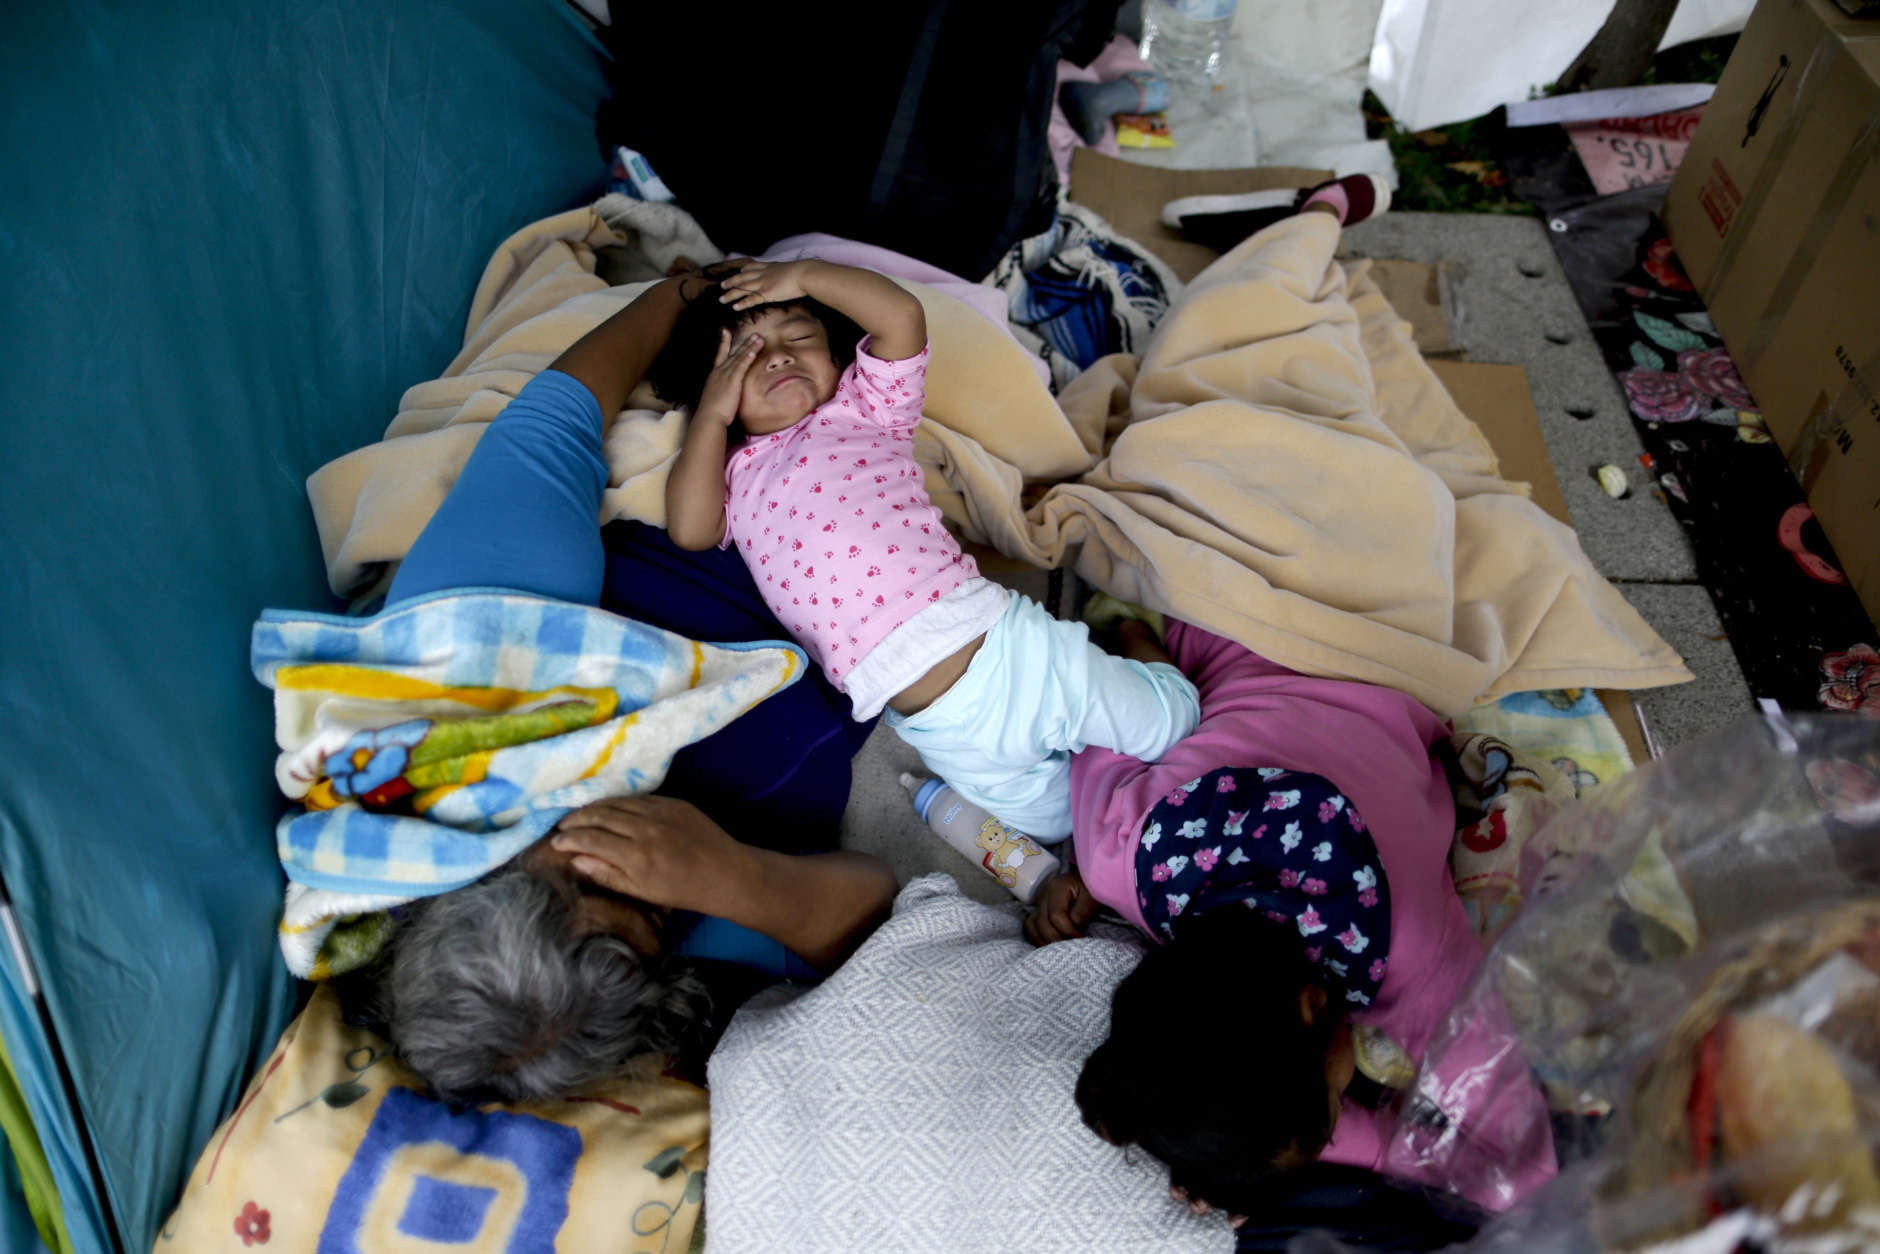 A family sleeps on a square after being displaced from their home due to the risk of collapse, in the aftermath of a 7.1 earthquake, in Mexico City, Friday, Sept. 22, 2017. Those who witnessed buildings collapse said the tragedy could have been much worse. Some buildings didn't fall immediately, giving people time to escape, and some shattered but left airspaces where occupants survived. (AP Photo/Natacha Pisarenko)